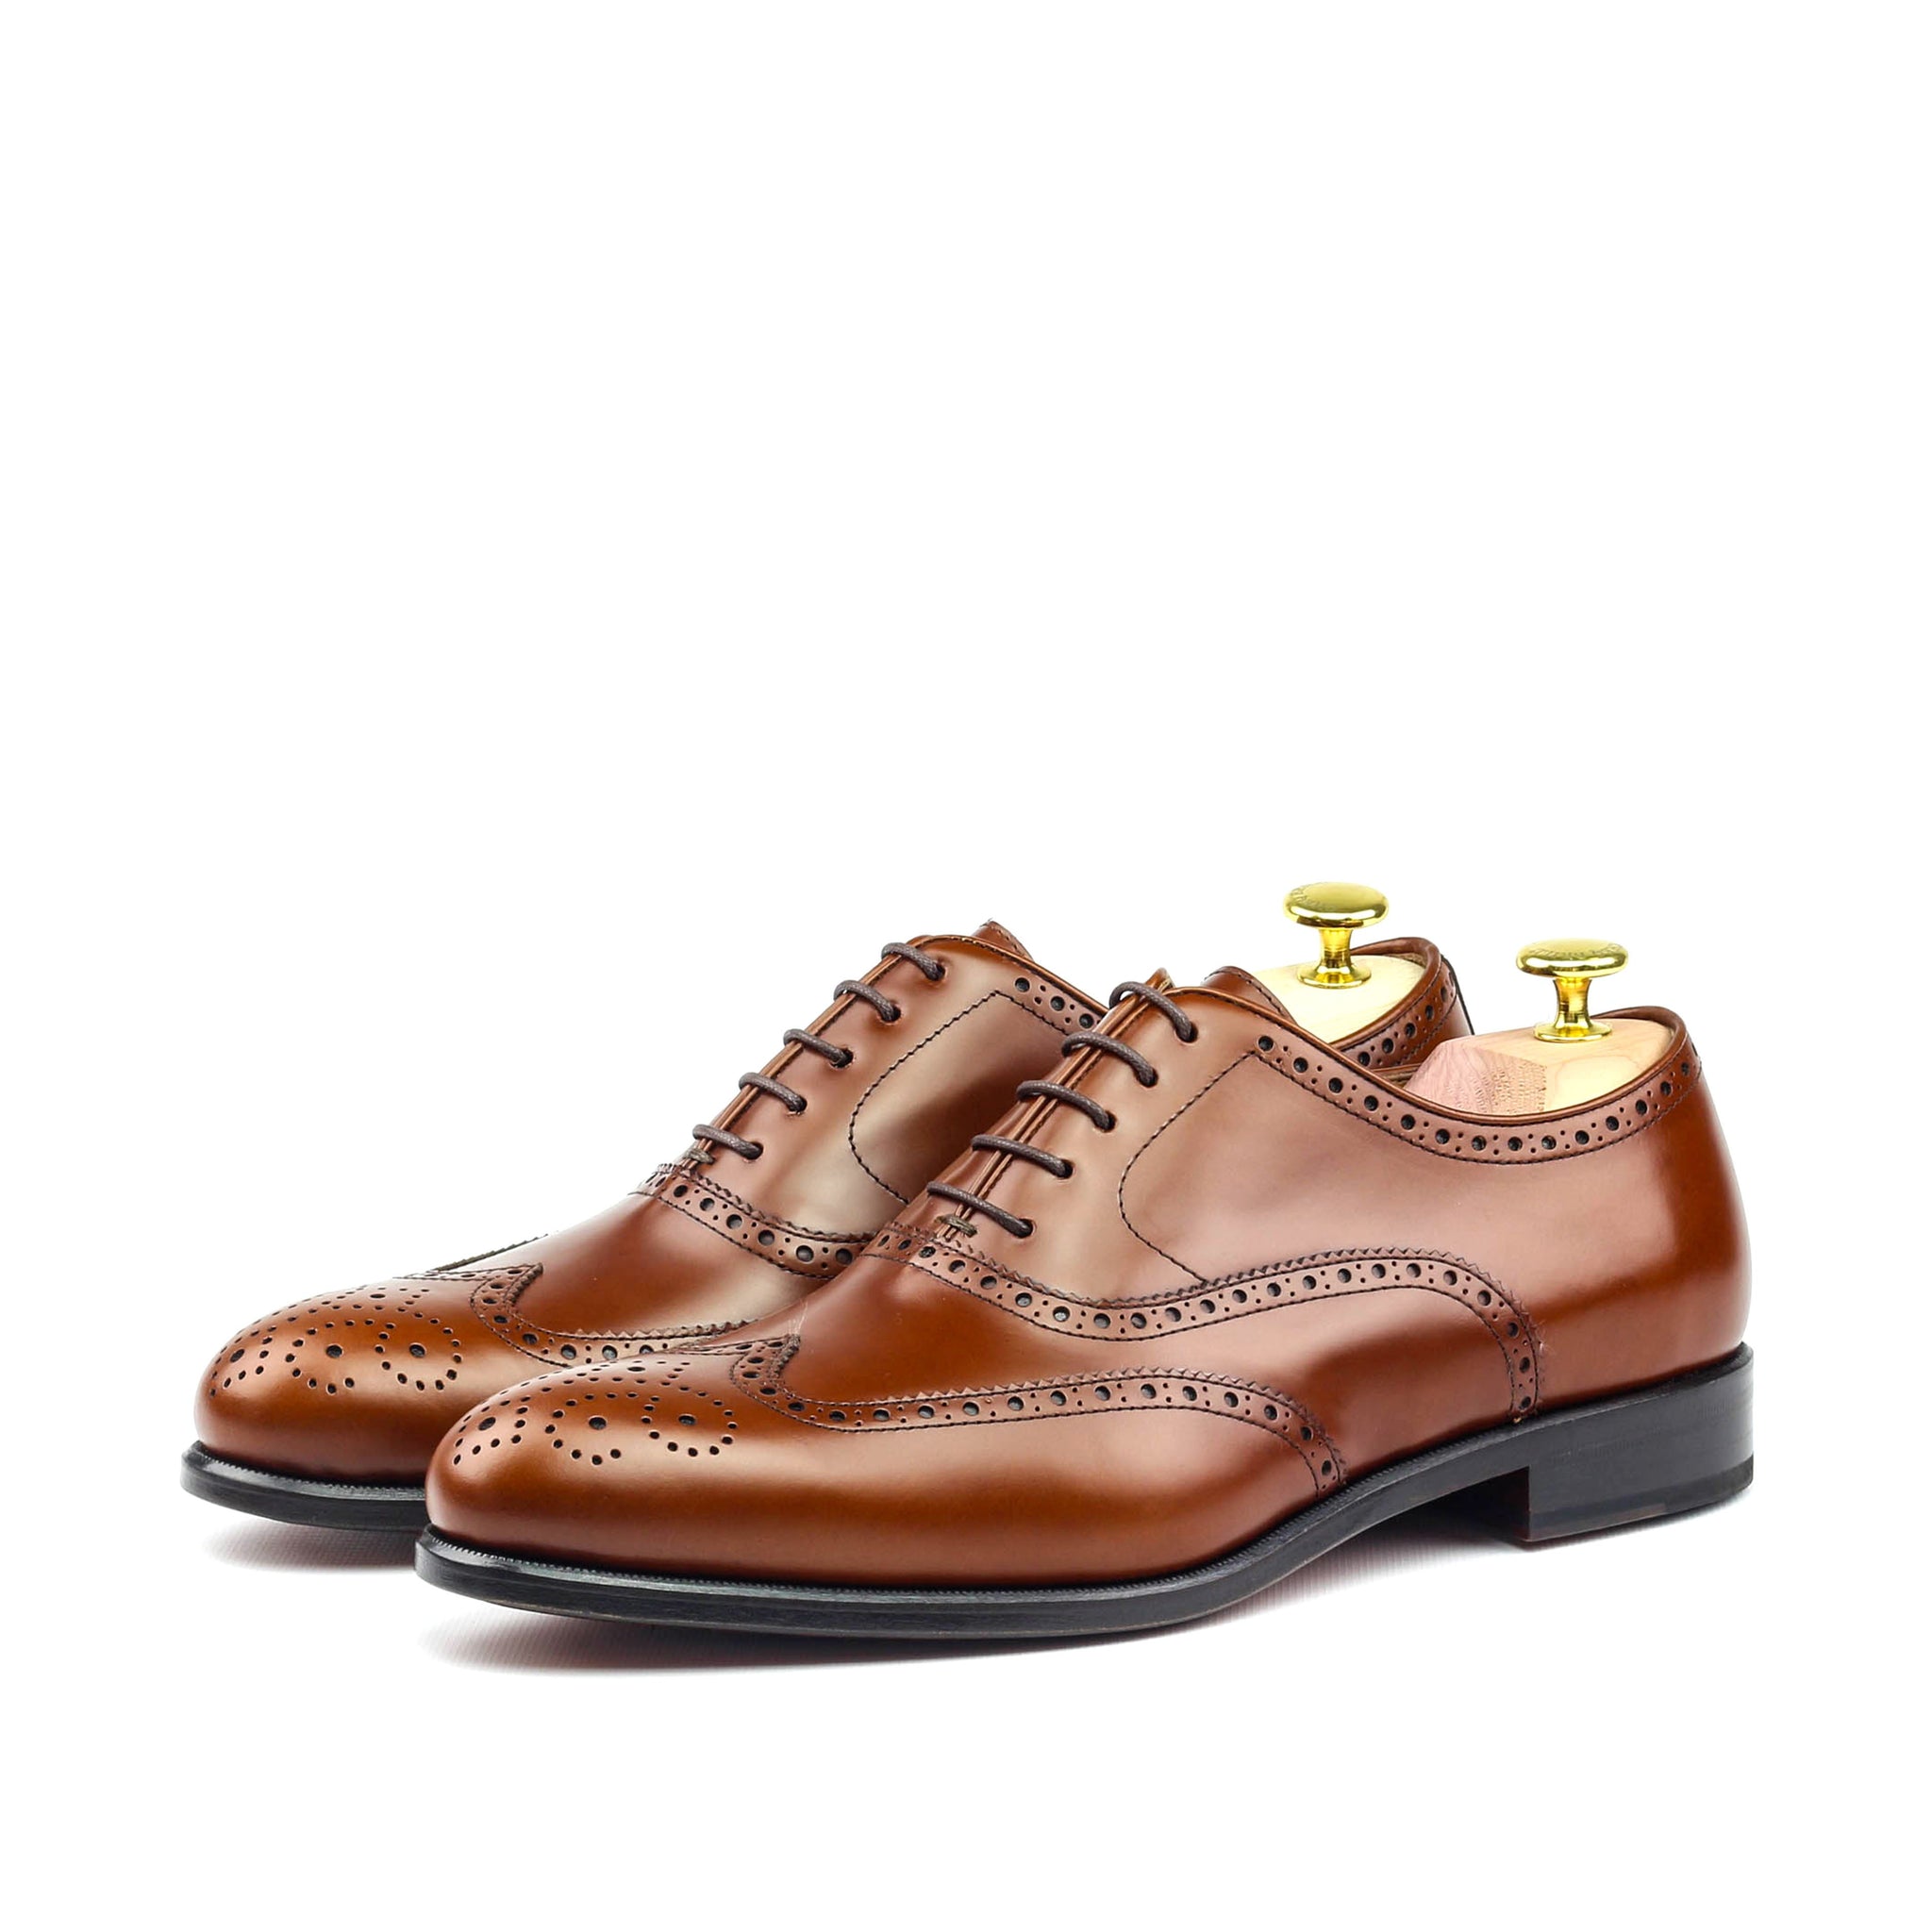 ALAN THE RED - Unique Handcrafted Cognac Brown Box Calf Wingtip Oxford w/ Full Brogue